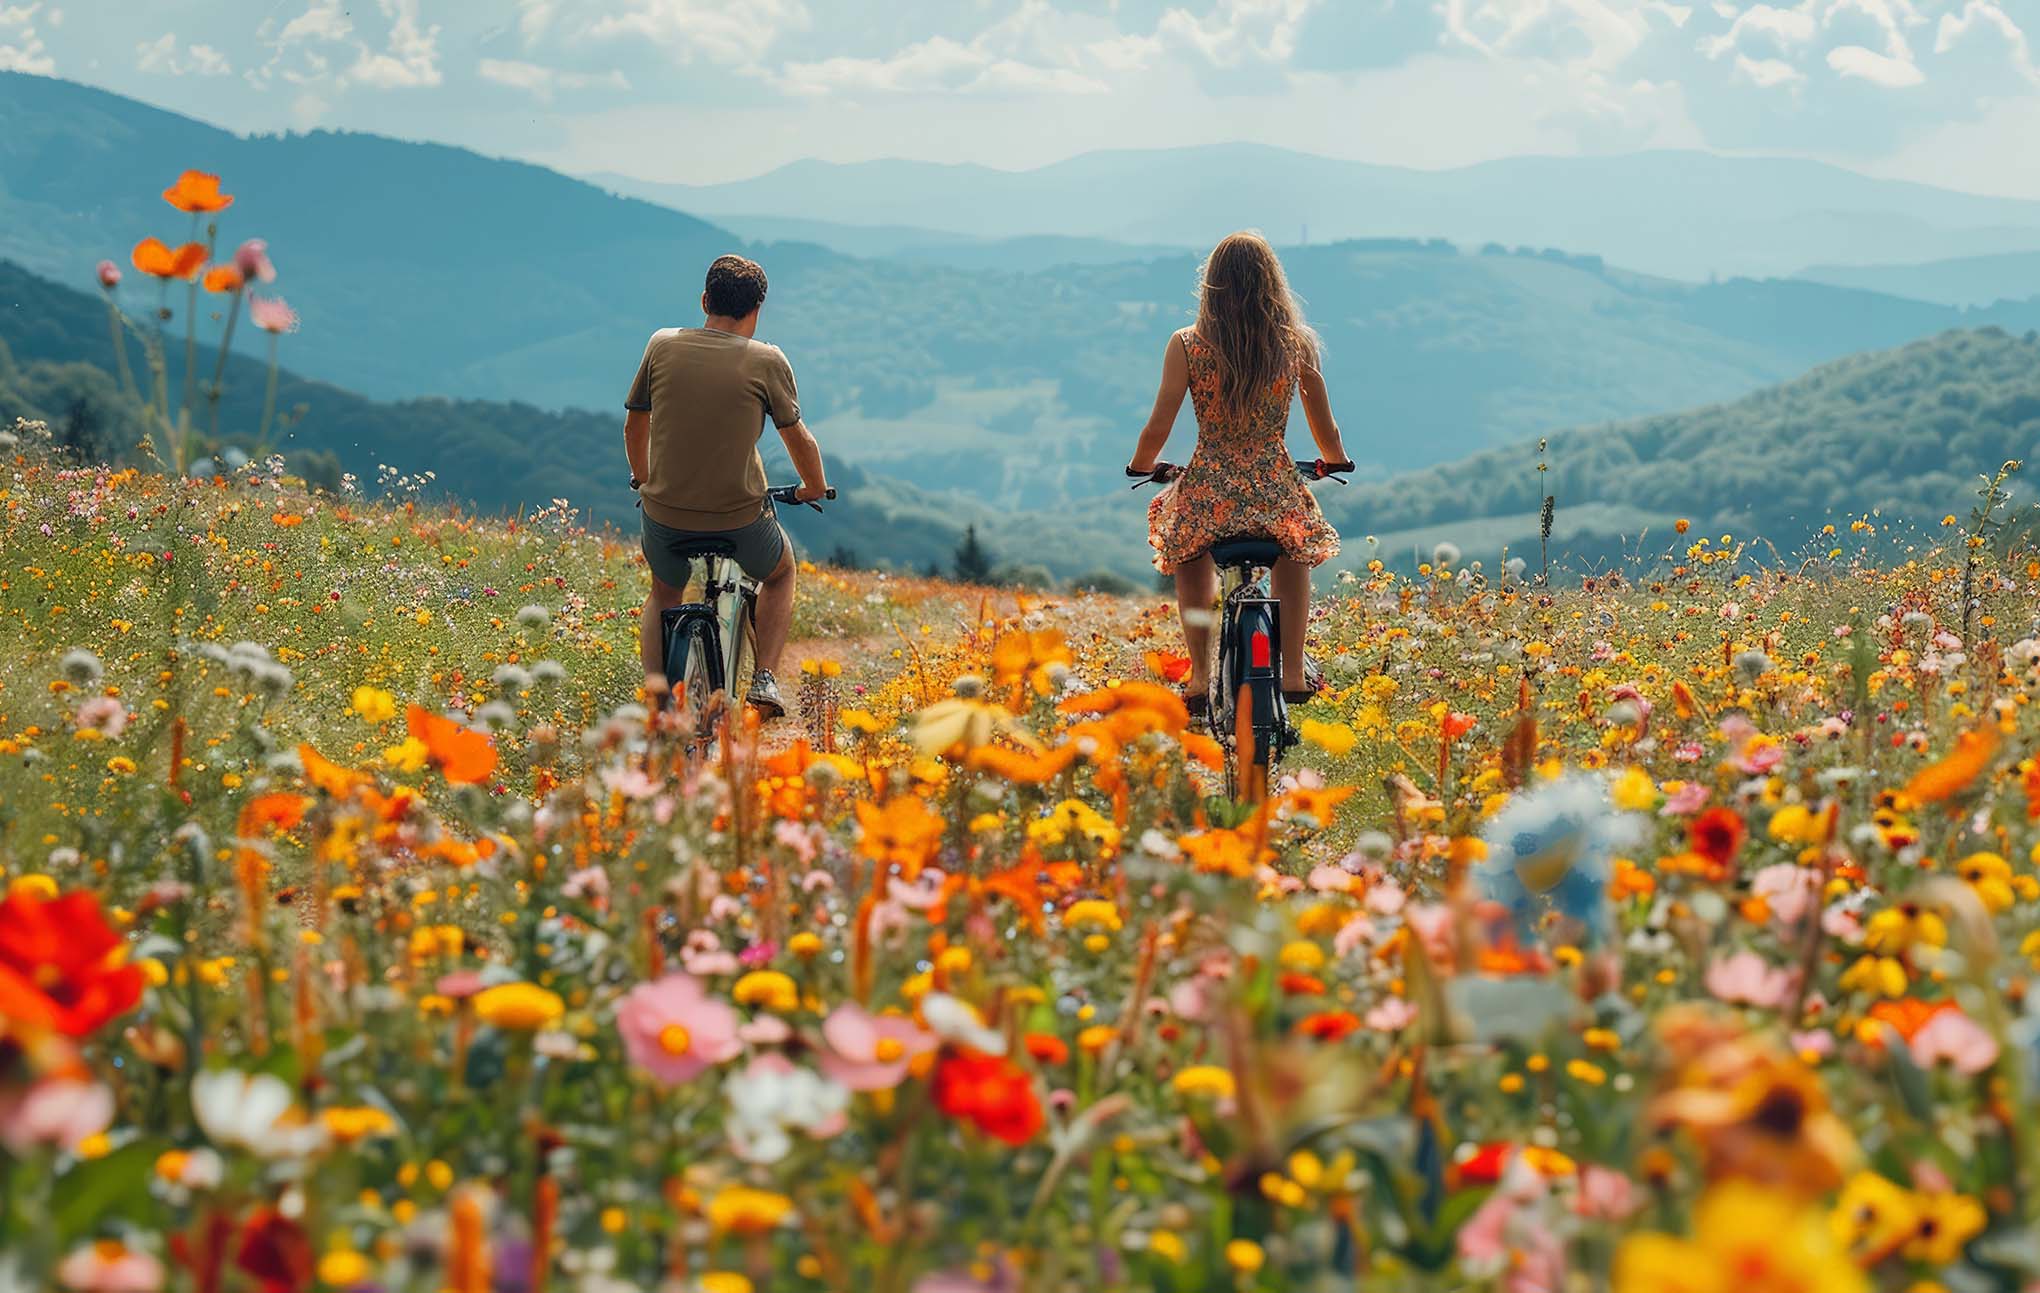 A man and woman cycling through a vibrant wildflower meadow in a mountainous landscape. the scene is bathed in sunlight, highlighting the multi-colored blooms and distant green hills under a blue sky.